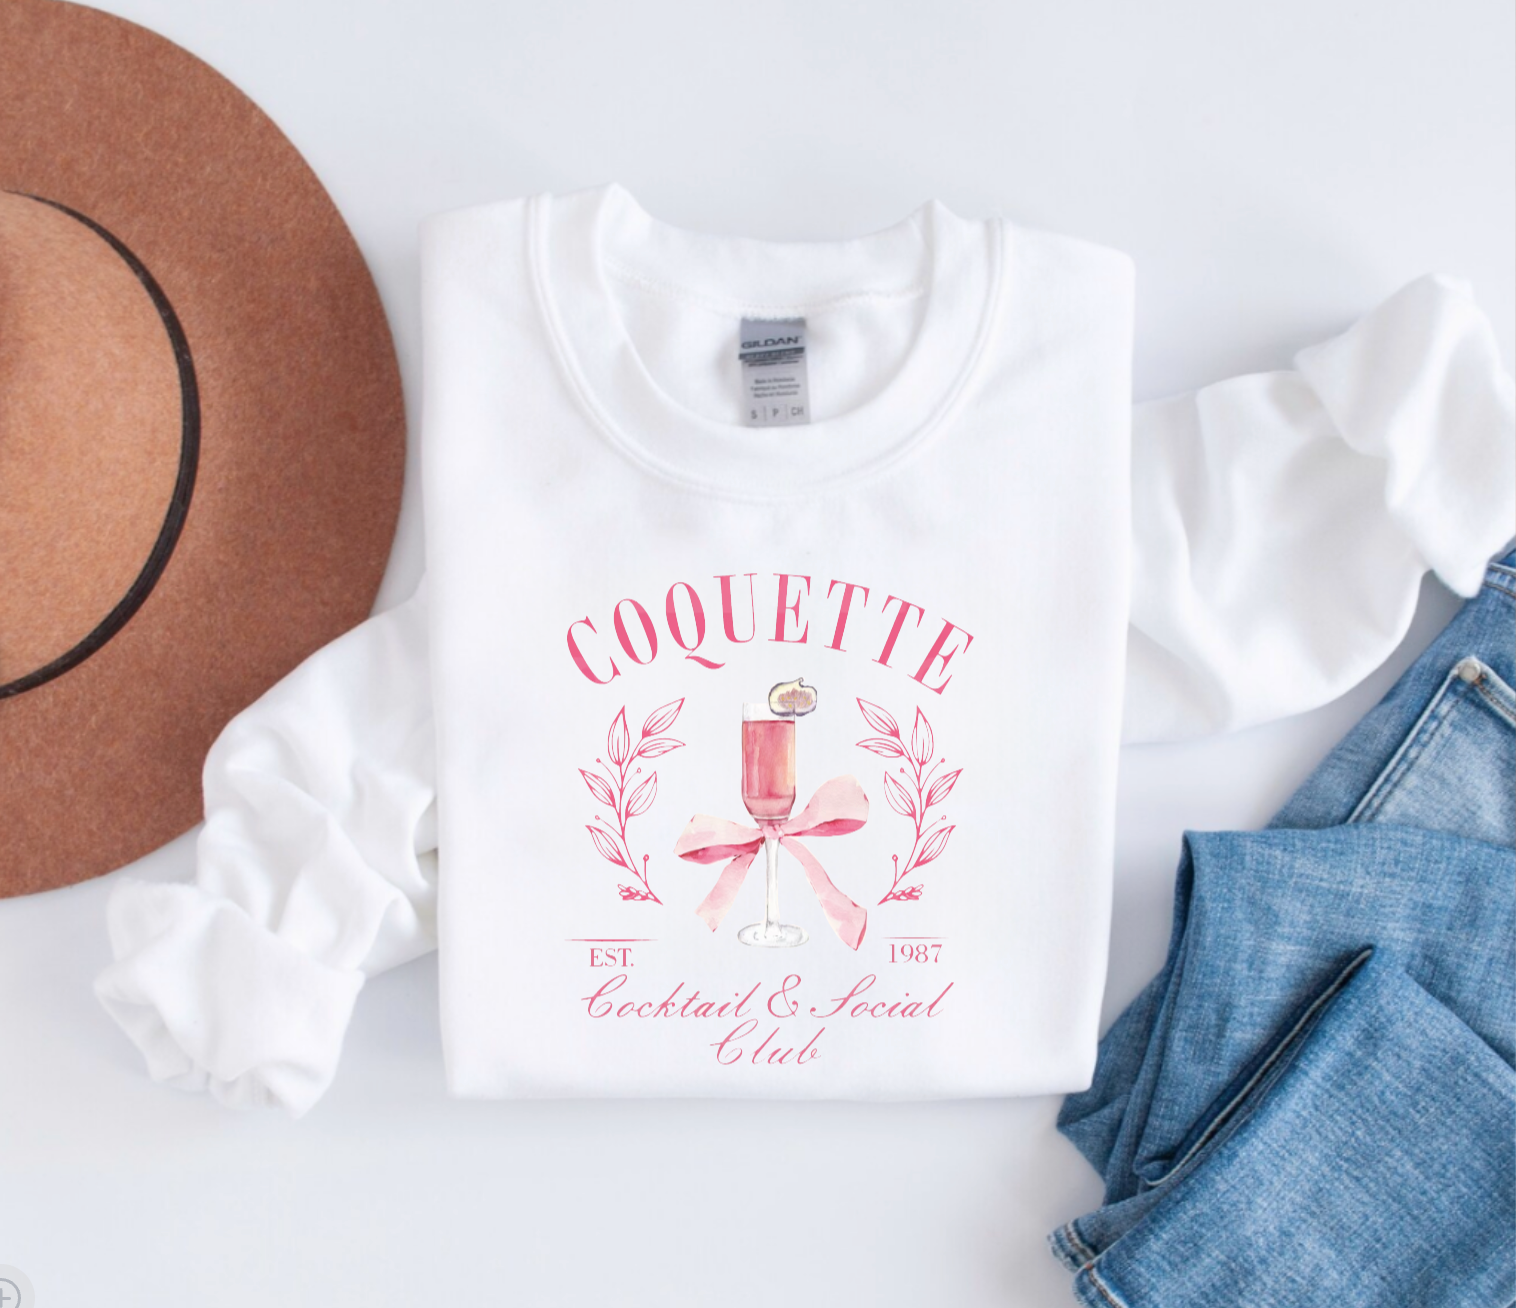 Coquette Cocktail & Social Club Pink Bow Valentine's Day White Crewneck